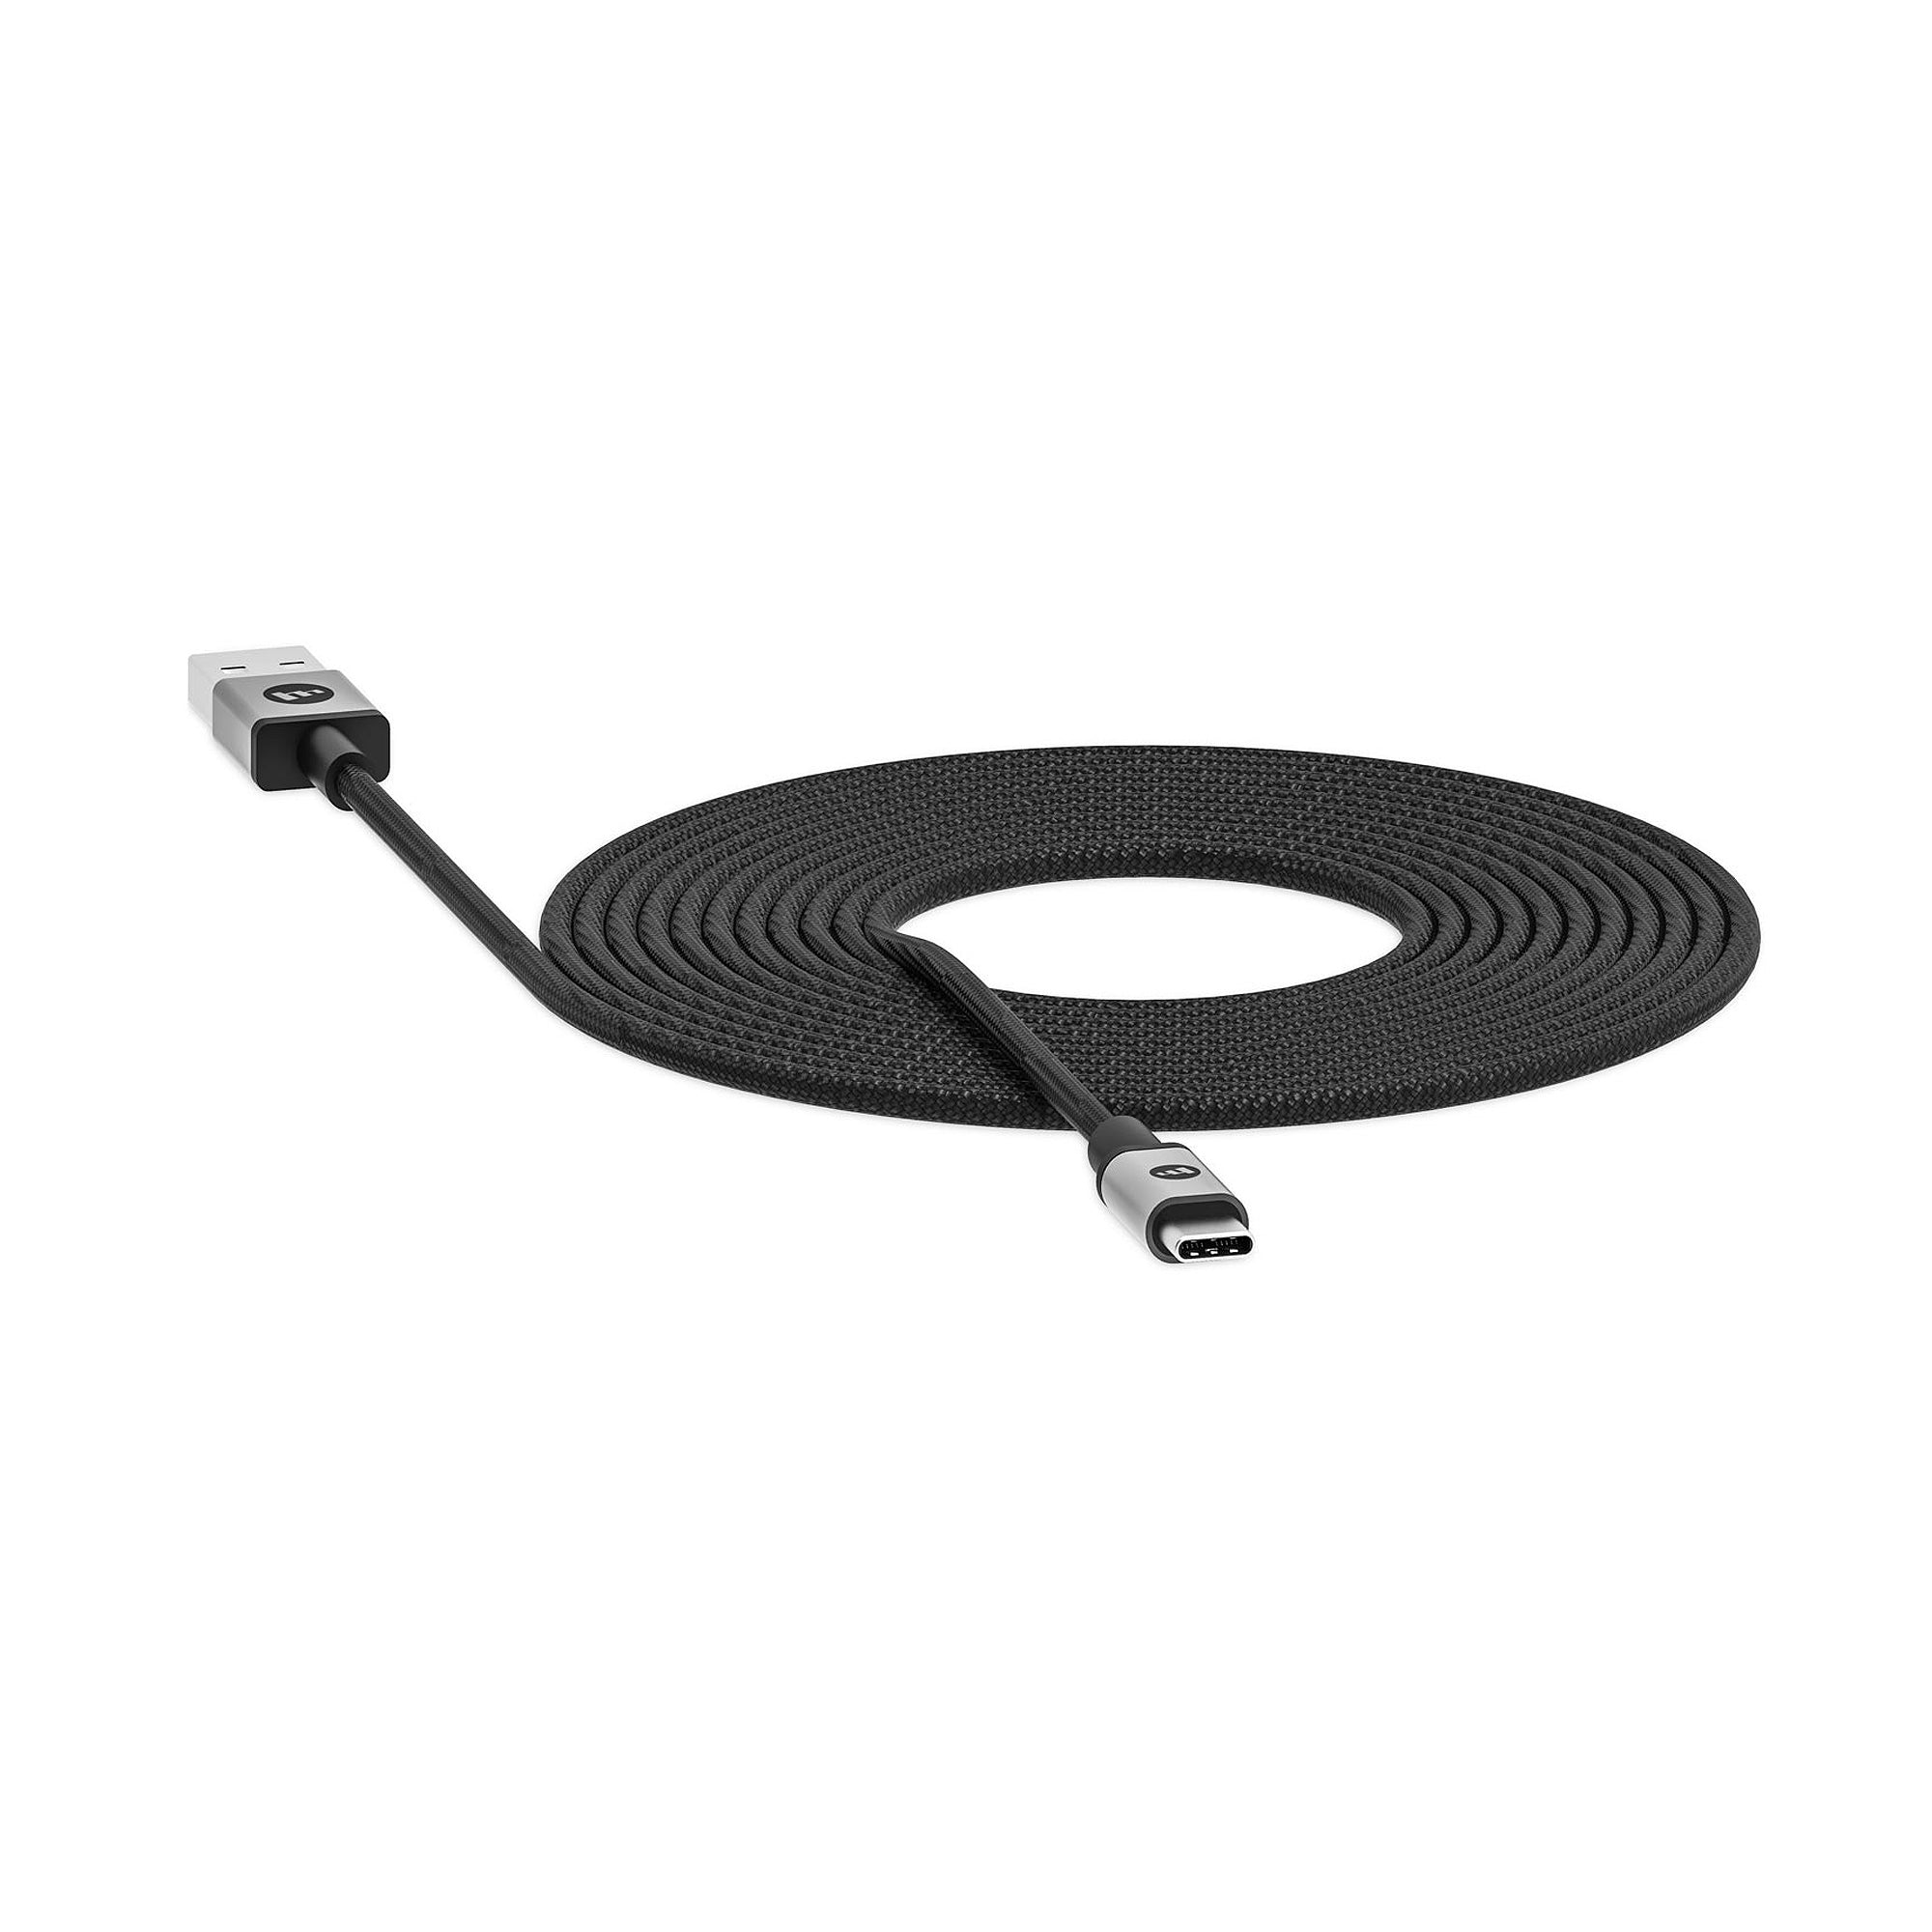 mophie USB-C Cable with USB-C Connector (3m) - Apple (UK)